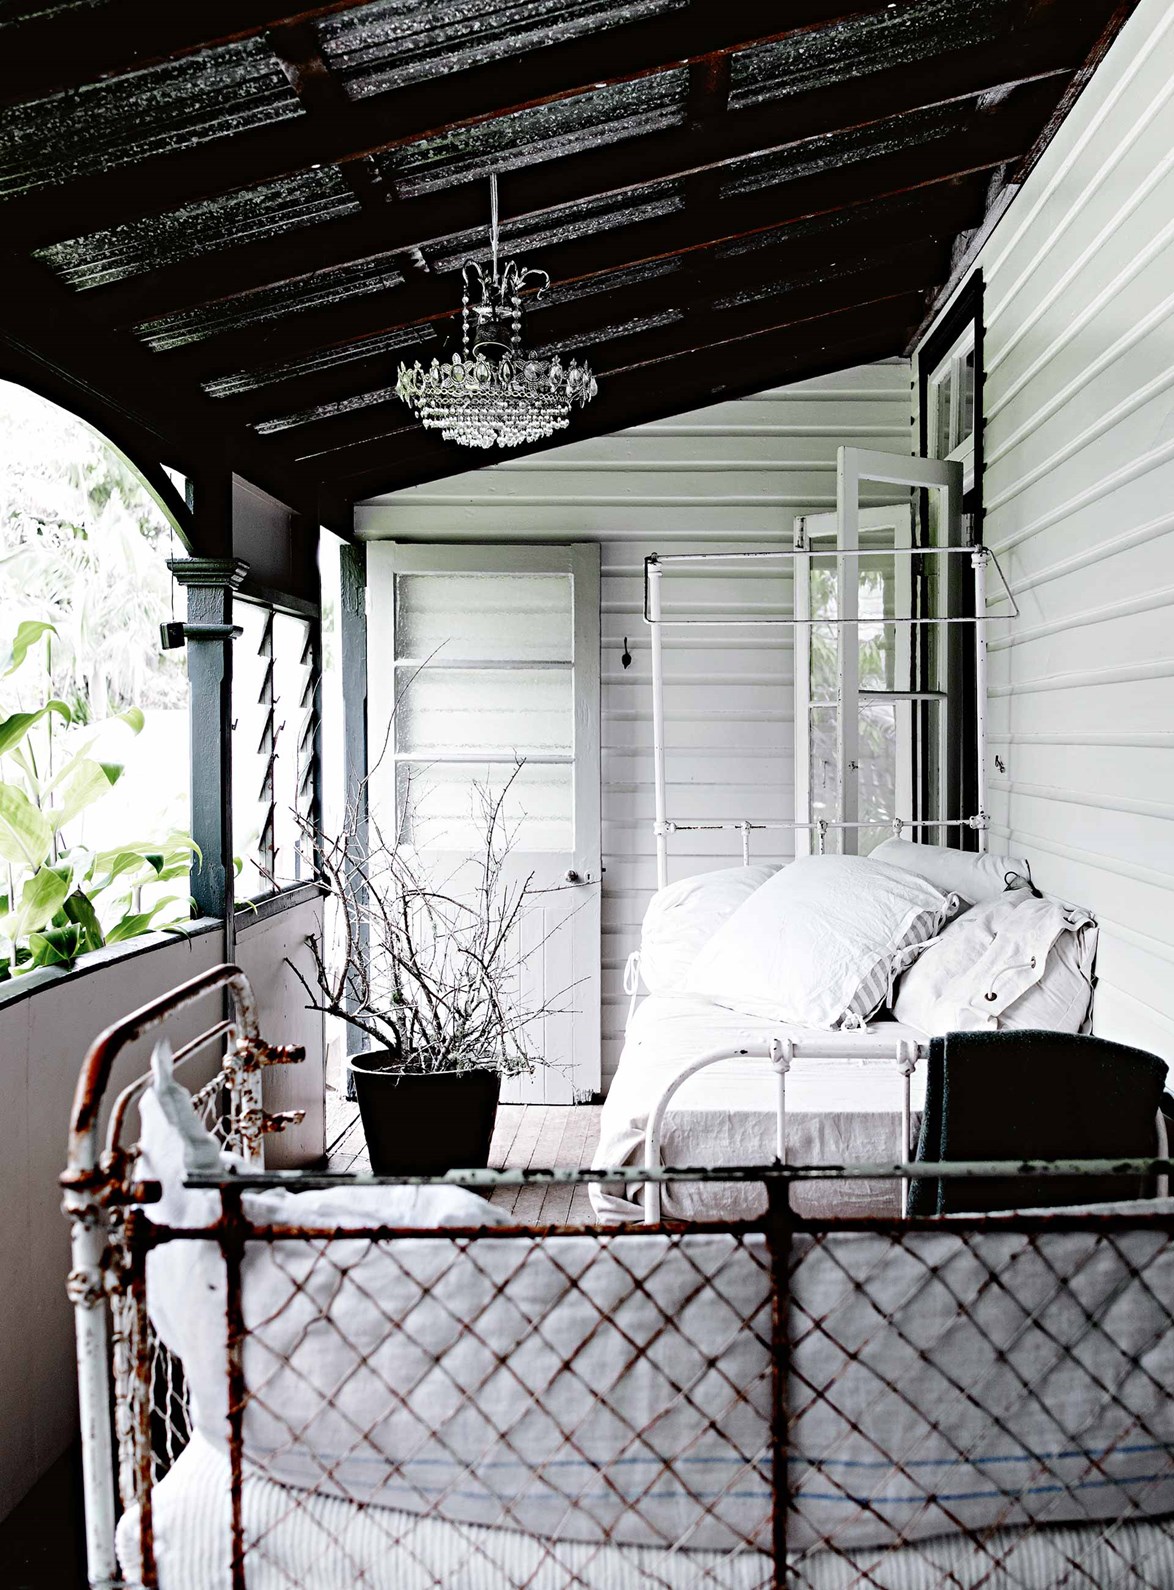 Comfy vintage daybeds and a sparkling chandelier have transformed an old verandah into a shabby chic retreat. That's because the verandah is where [Byron Bay homeowner and dressmaker](https://www.homestolove.com.au/dressmakers-white-vintage-interior-in-the-byron-bay-hinterland-13719|target="_blank") Michelle Douglas does the majority of her work, designing and sewing clothing for her two labels [Meg By Design](https://megbydesign.com/|target="_blank"|rel="nofollow") and [Chapel & Co](https://chapelandco.com/|target="_blank"|rel="nofollow").